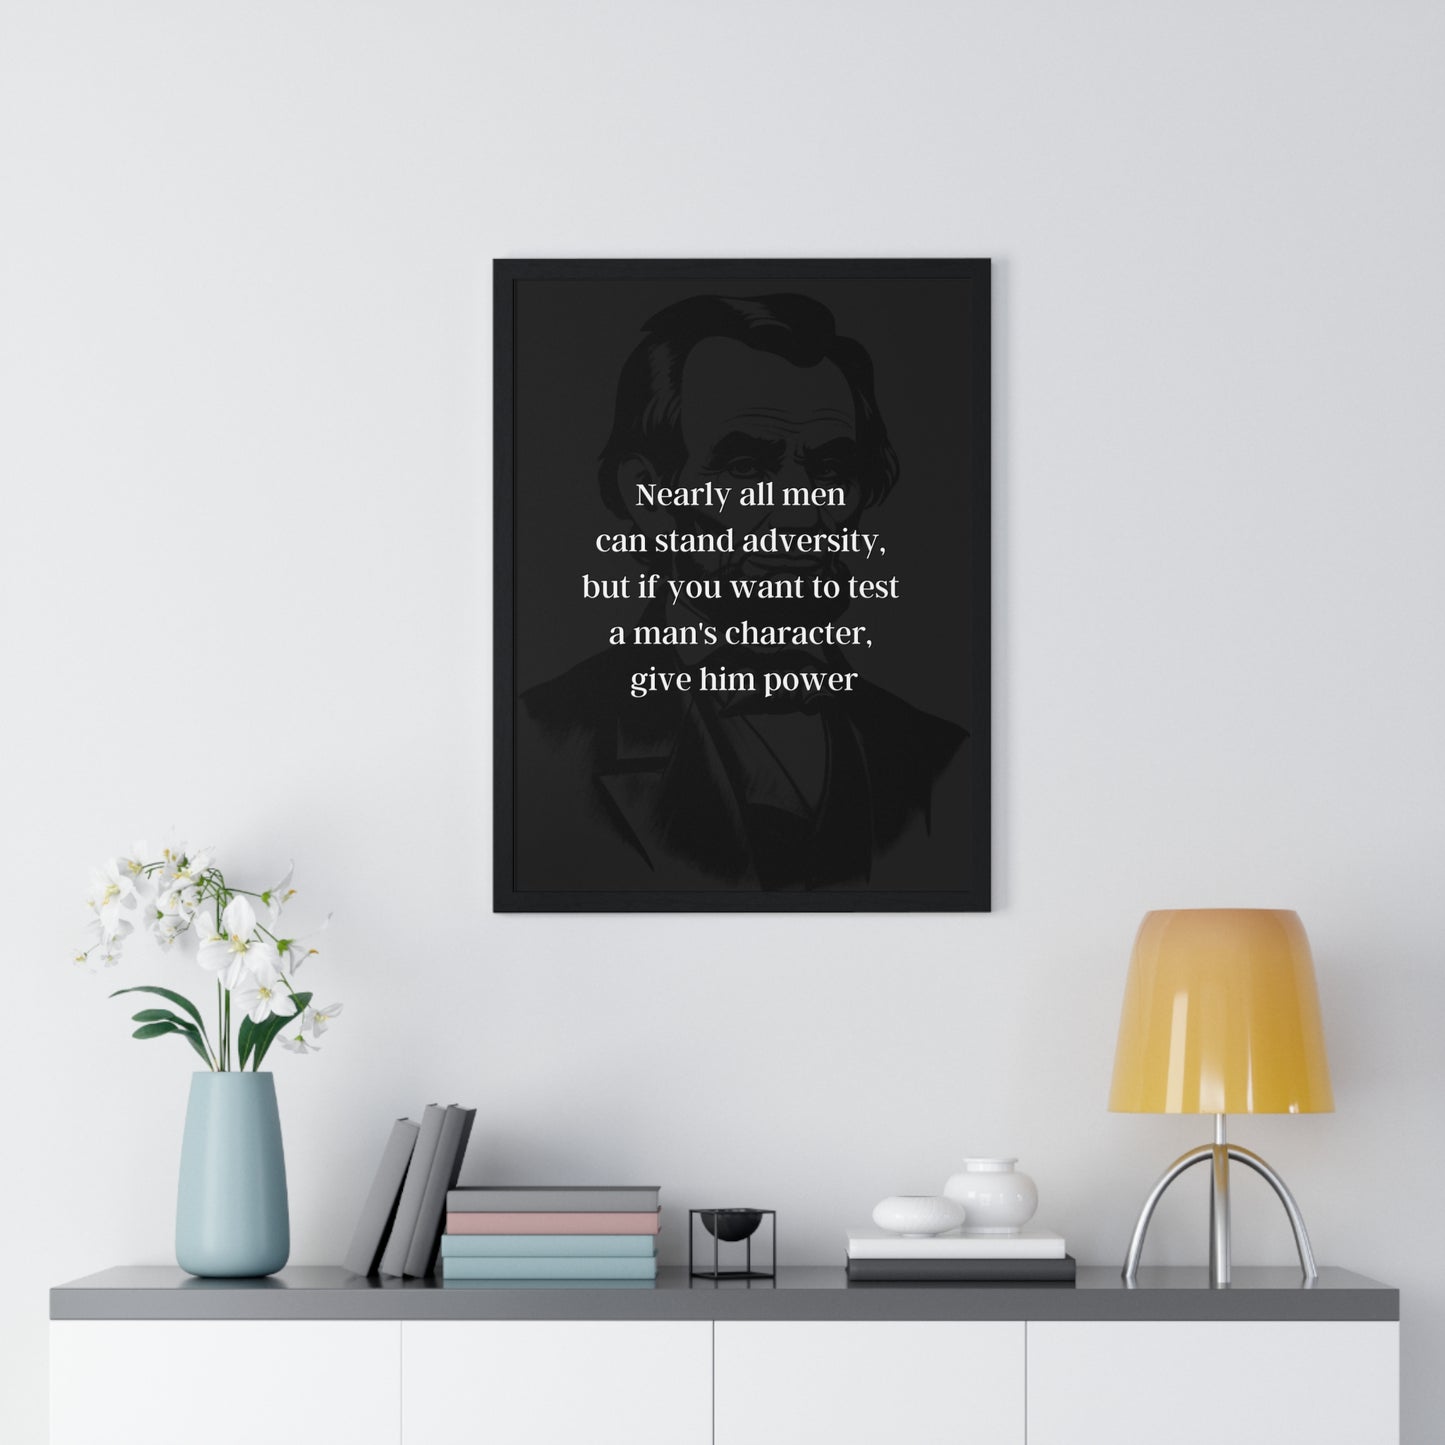 Abraham Lincoln Quote 5, Poster Art, Dark Print, 16th President of the United States, American Patriots, AI Art, Political Art, Poster Prints, Presidential Portraits, Presidential Quotes, Inspirational Quotes